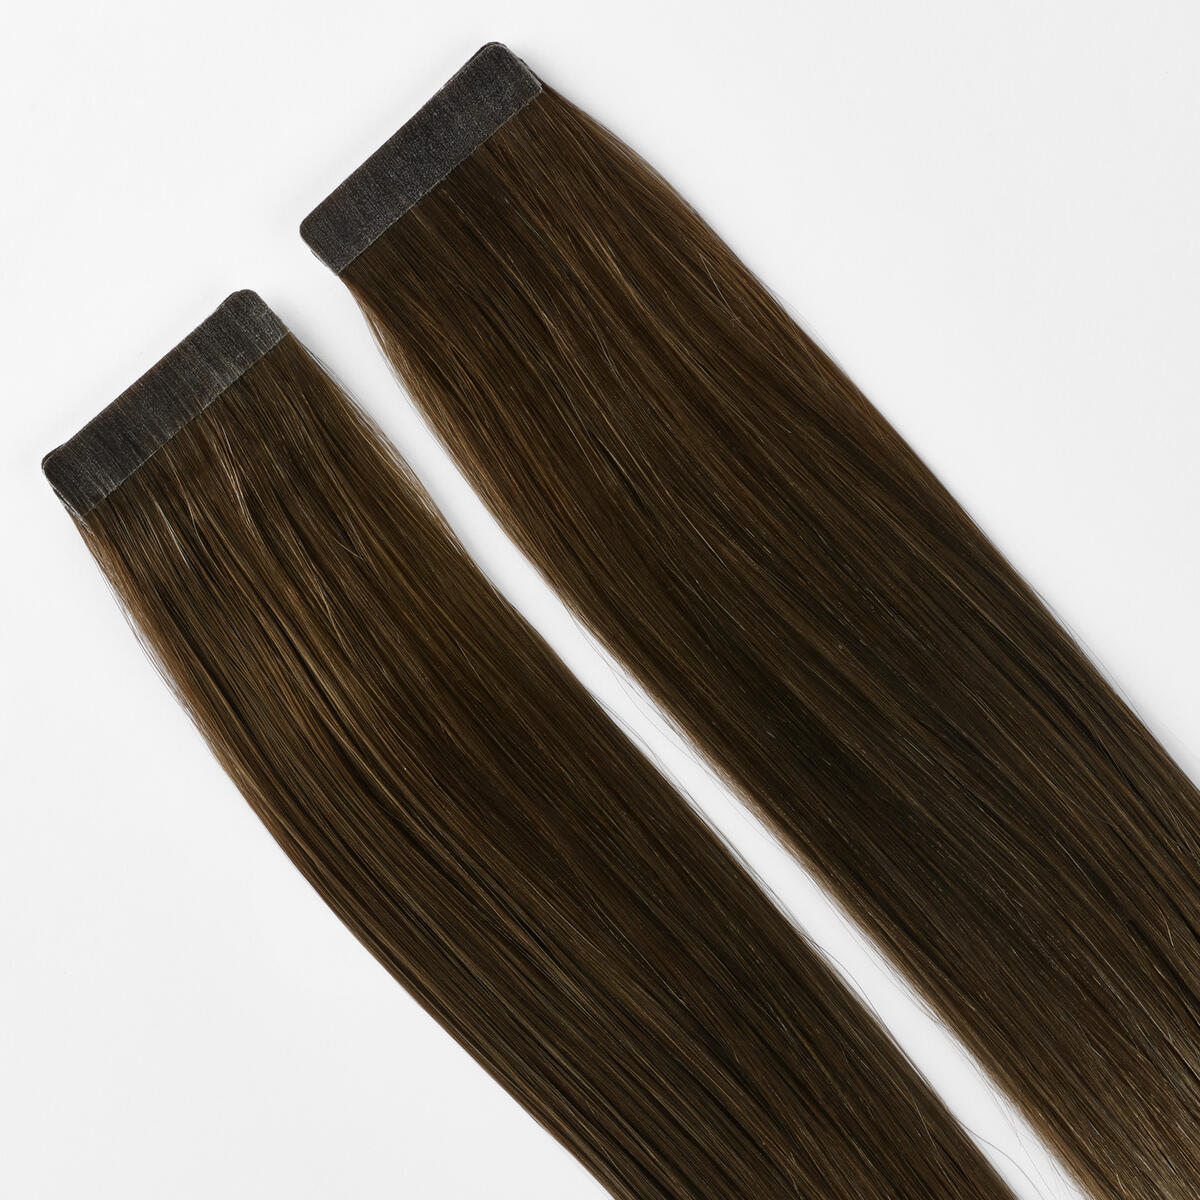 Basic Tape Extensions Classic 4 O2.6/8.0 Dark Ash Blond Ombre 60 cm